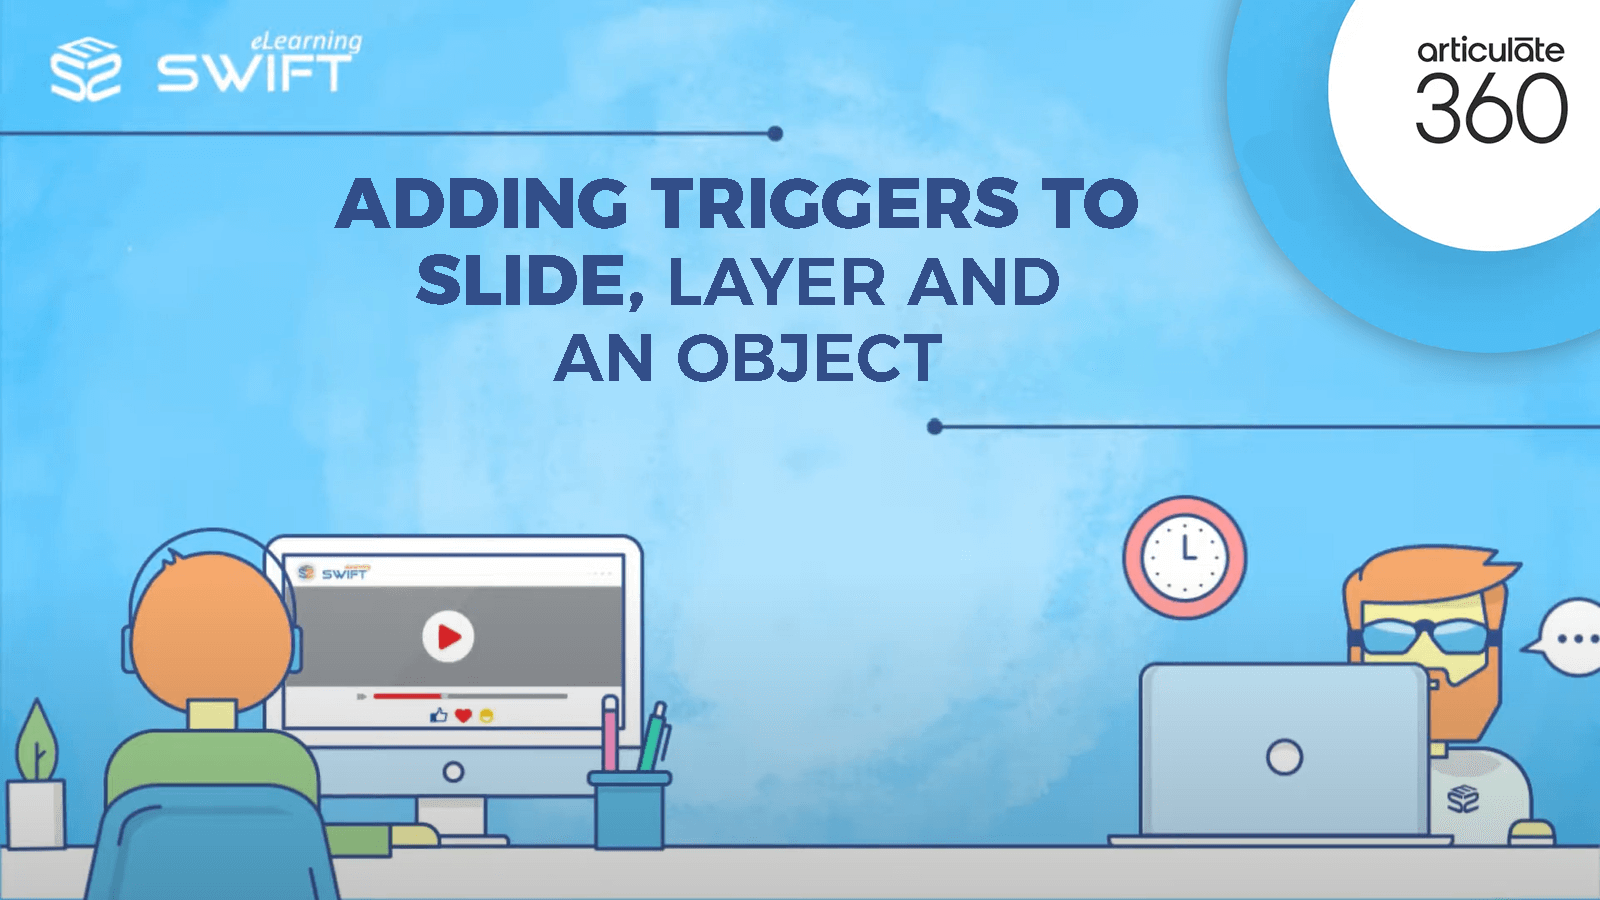 Adding triggers to Slide Layer and an Object